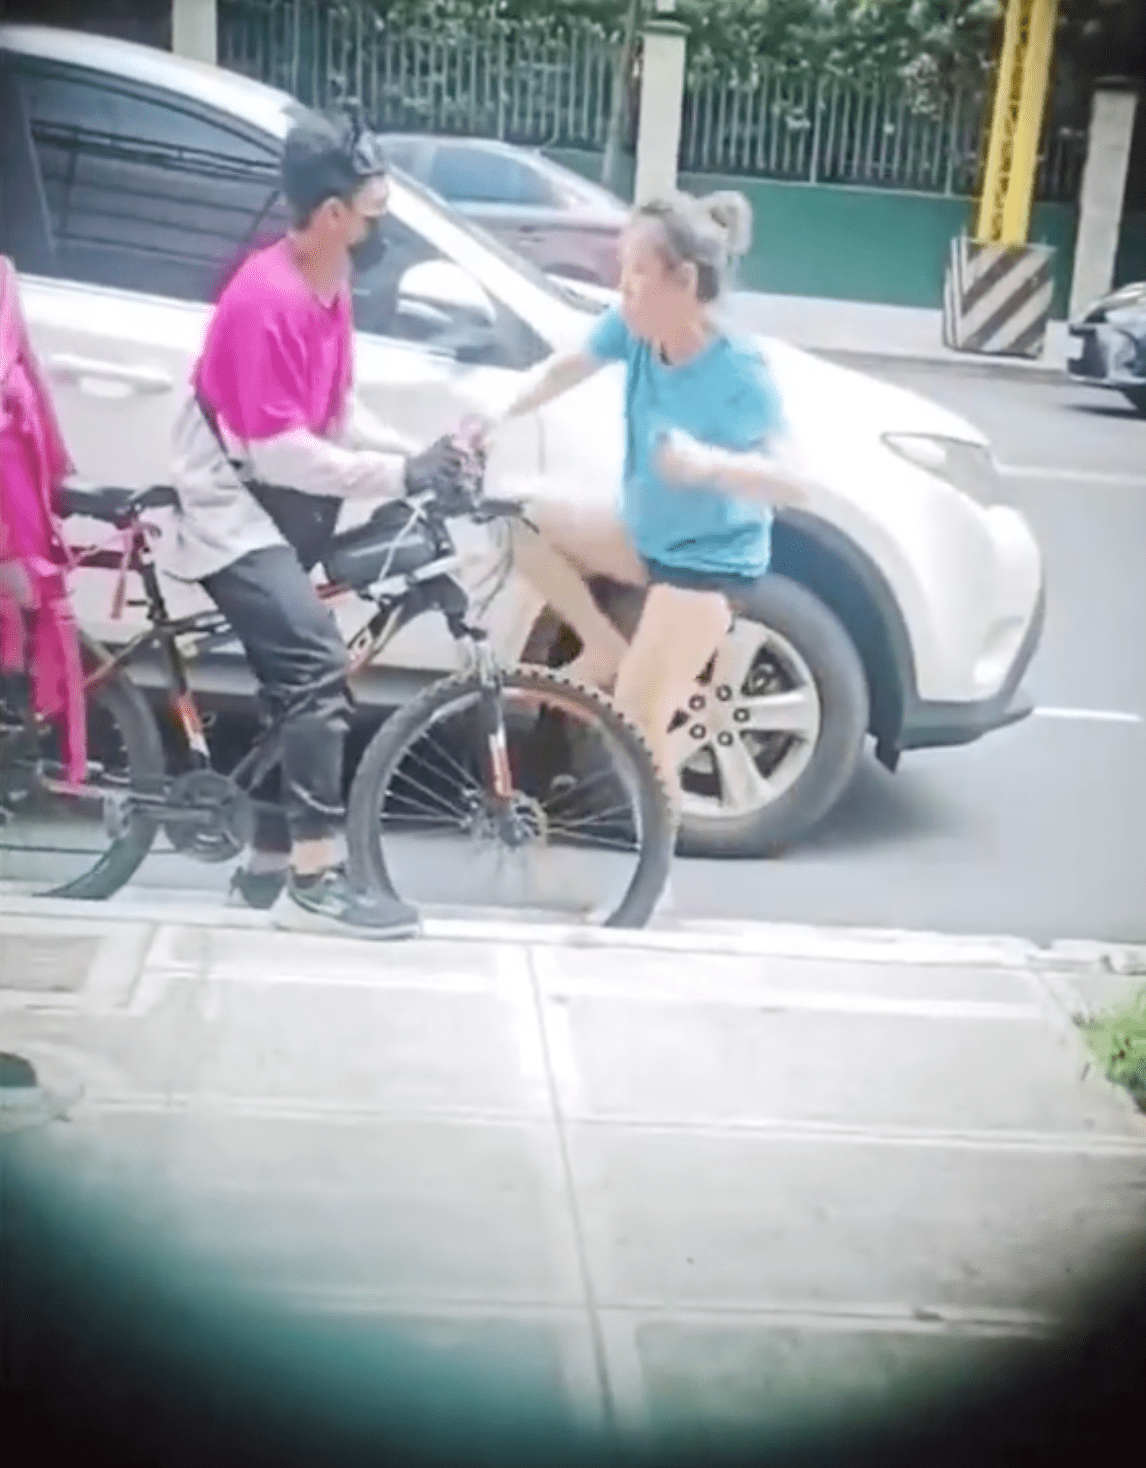 Woman kicks and slaps food delivery cyclist who accidentally scratched her car 01